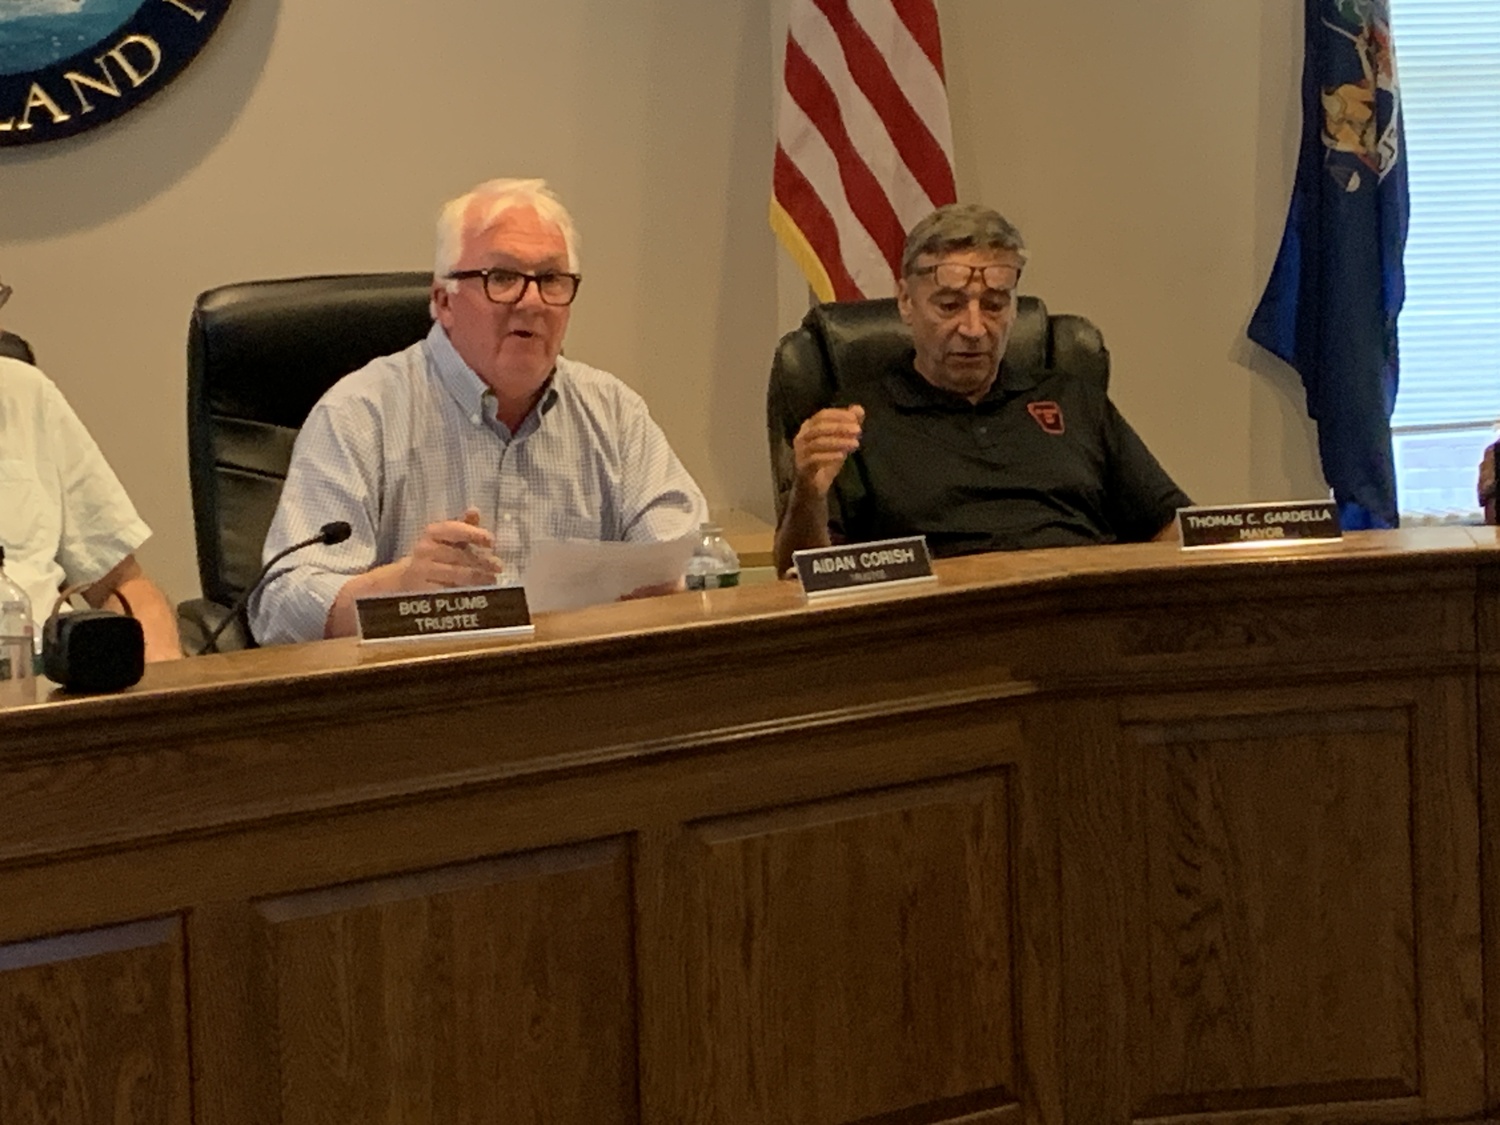 Trustee Aidan Corish, left, and Mayor Tom Gardella bickered and spoke over one another at Monday's meeting before reaching a compromise at the end of the day. STEPHEN J. KOTZ